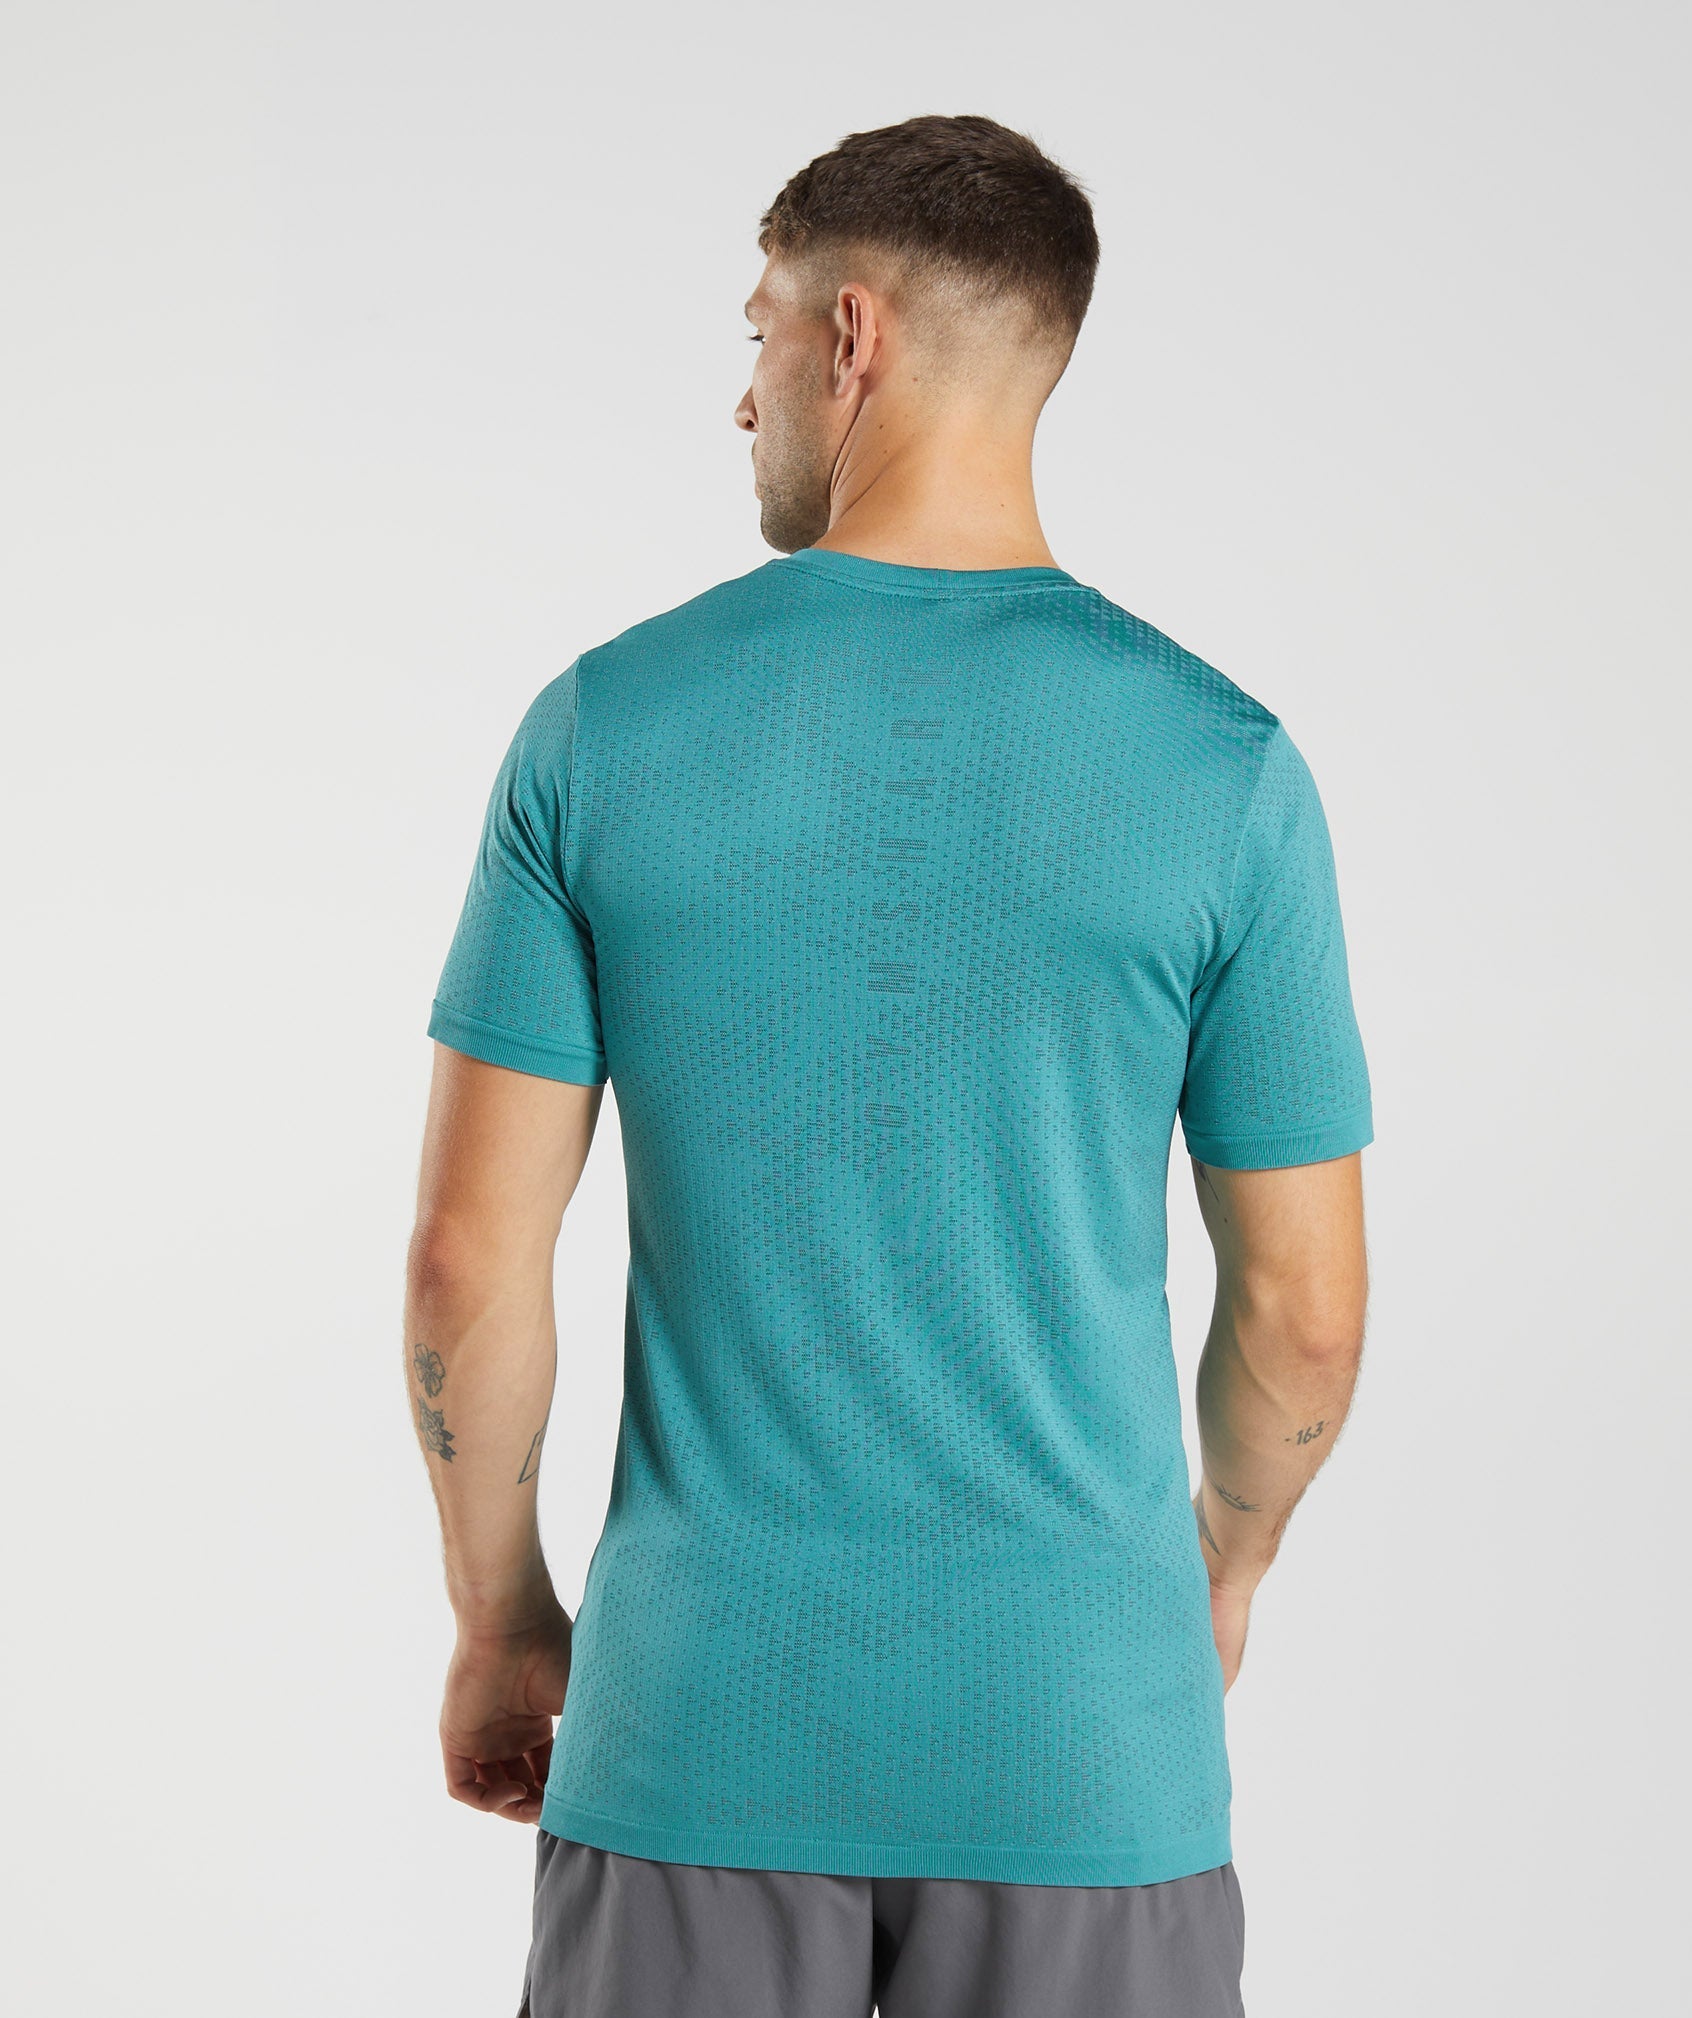 Sport Seamless T-Shirt in Slate Blue/Winter Teal - view 2